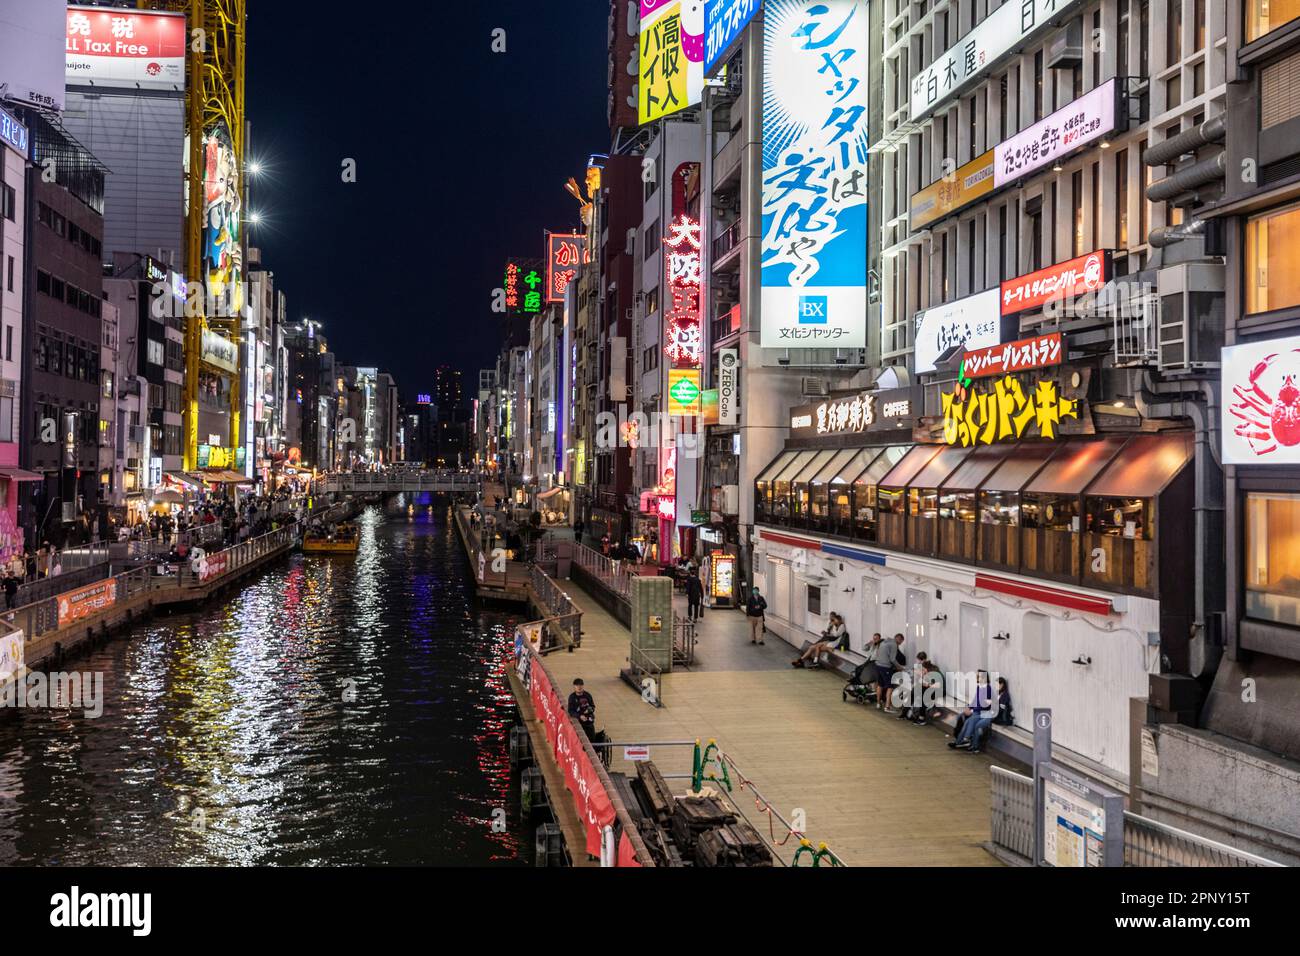 Osaka Japan April 2023, Dotonbori River canal at night time with neon lights and crowds gathering for dinner and entertainment, street scene,Japan Stock Photo